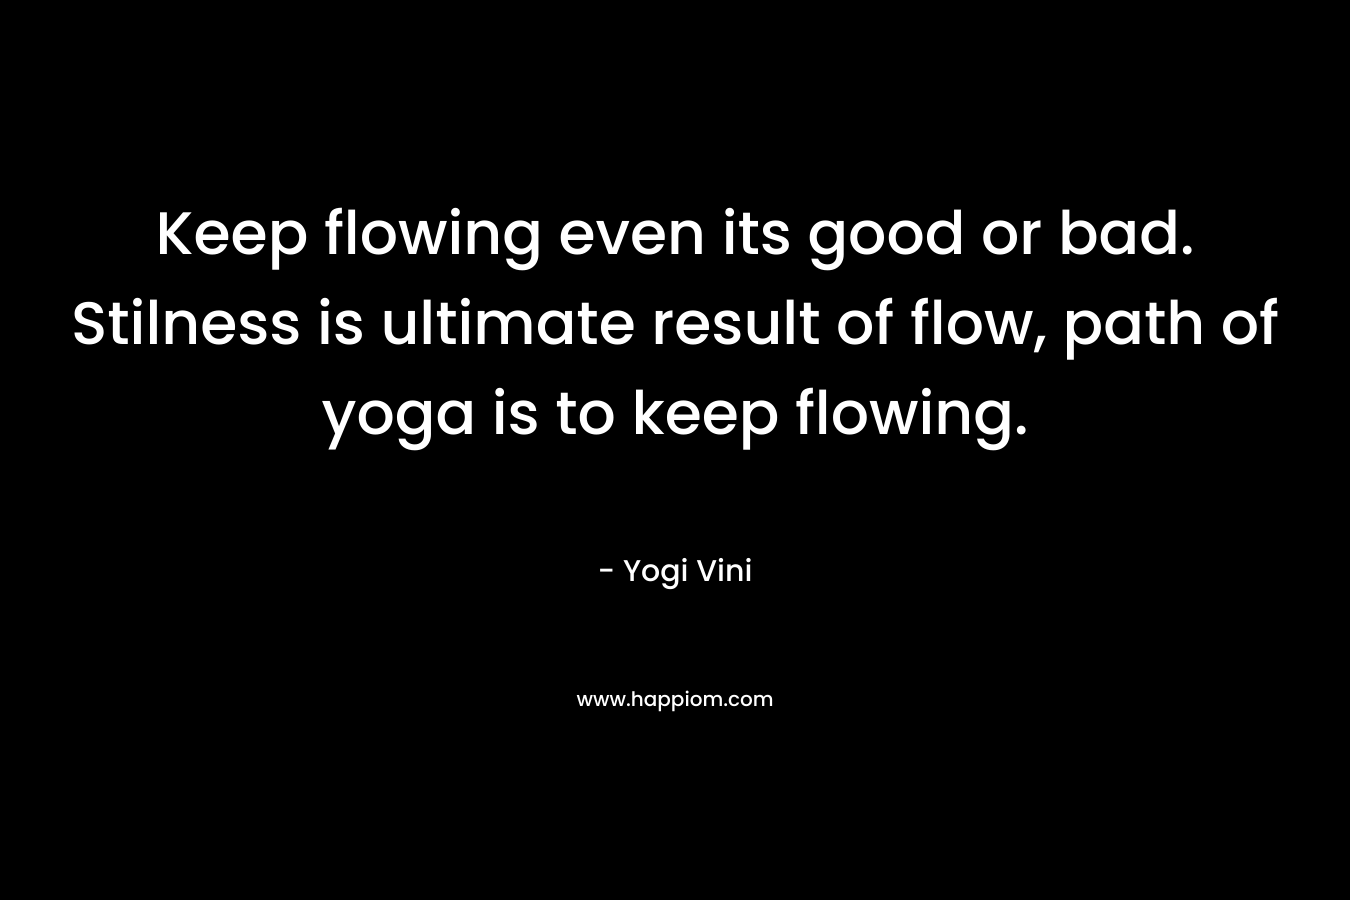 Keep flowing even its good or bad. Stilness is ultimate result of flow, path of yoga is to keep flowing.